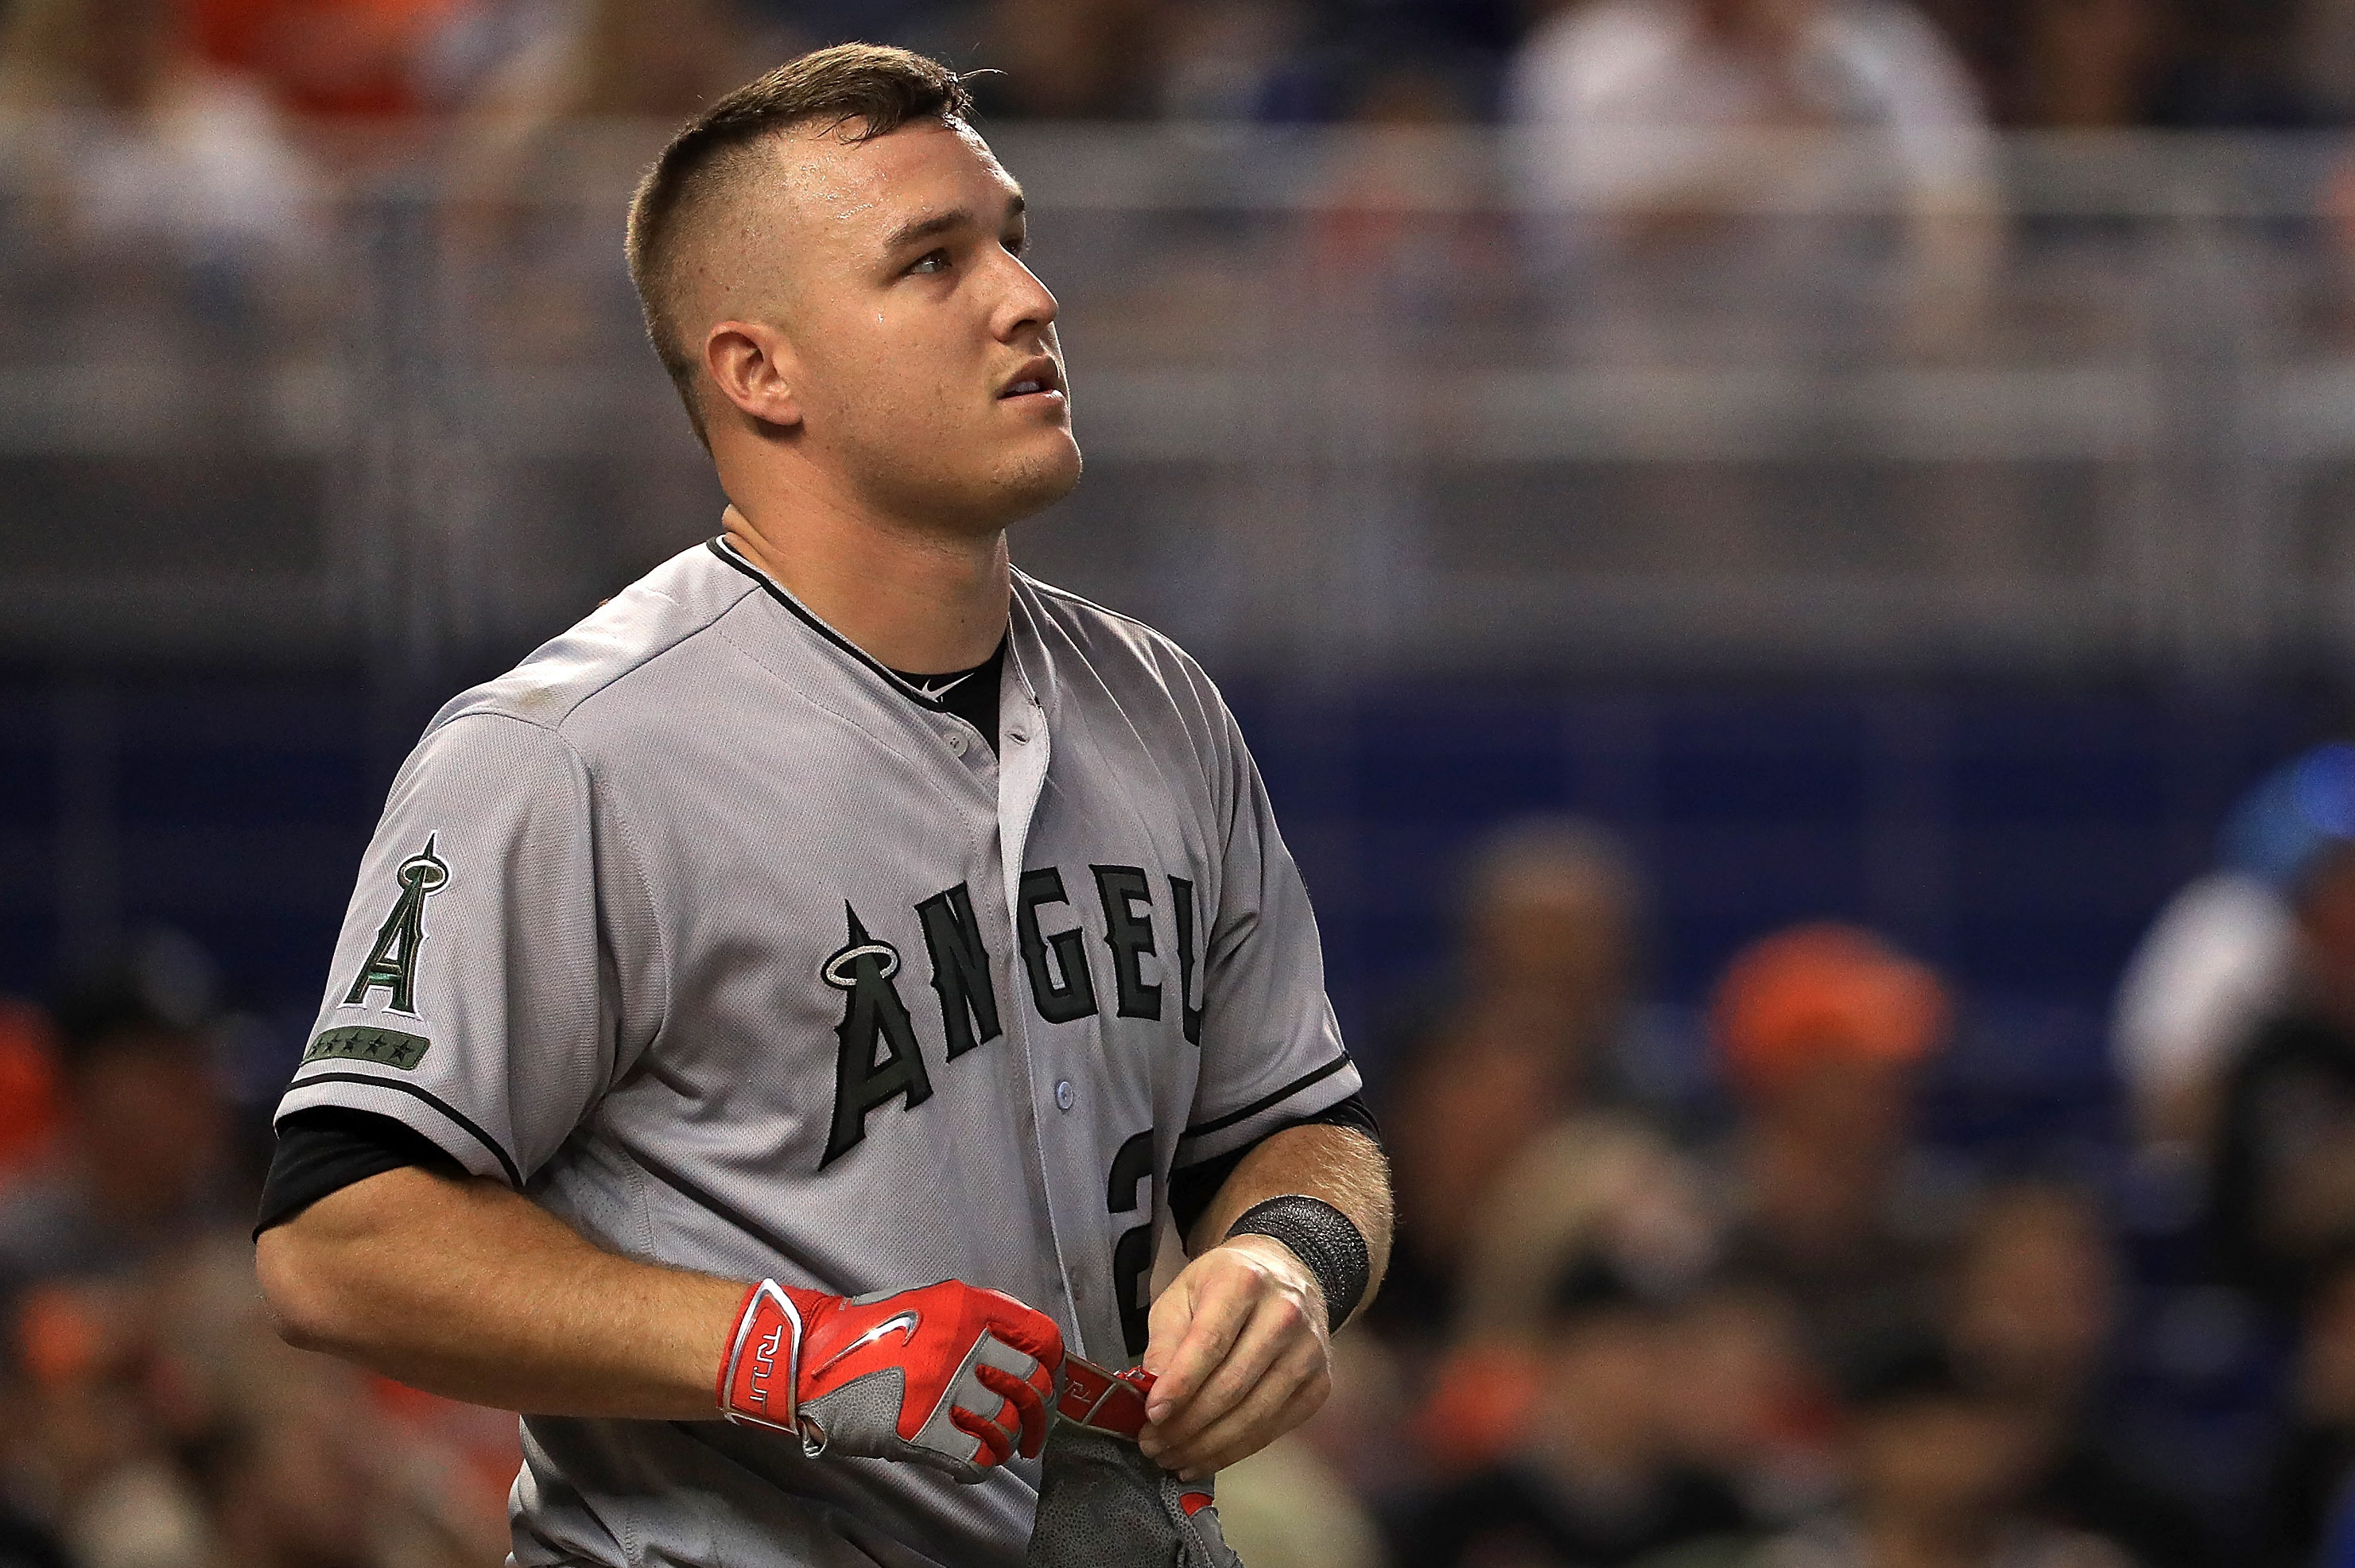 Angels star Mike Trout sprains left thumb, leaves game